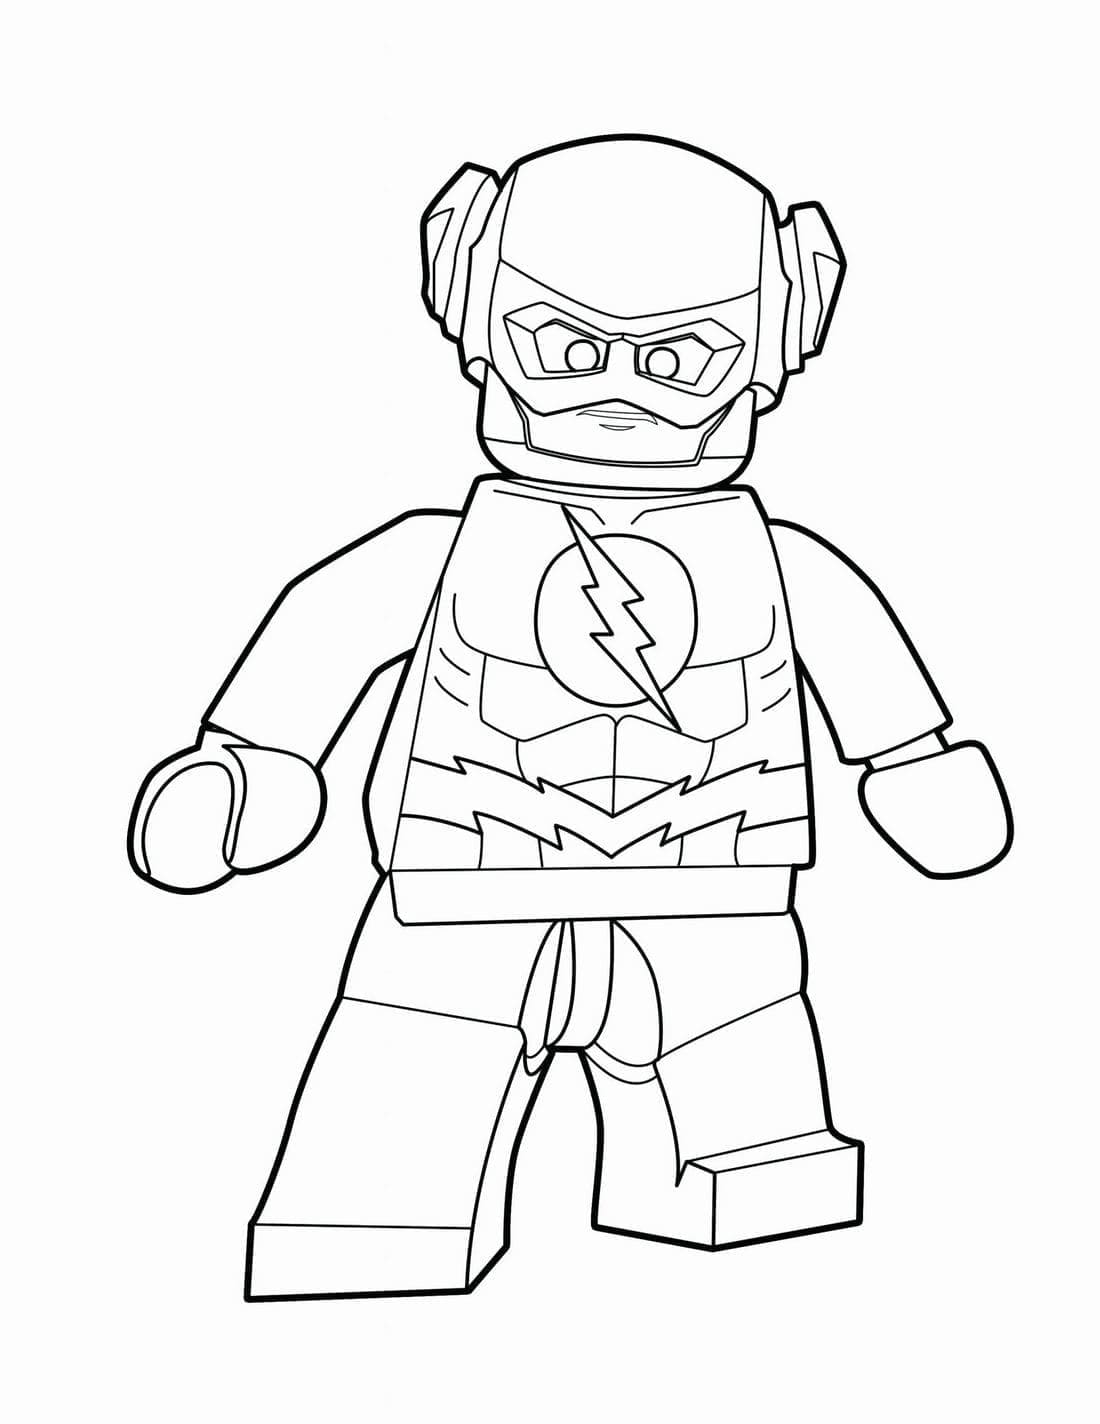 Flash Lego coloring page